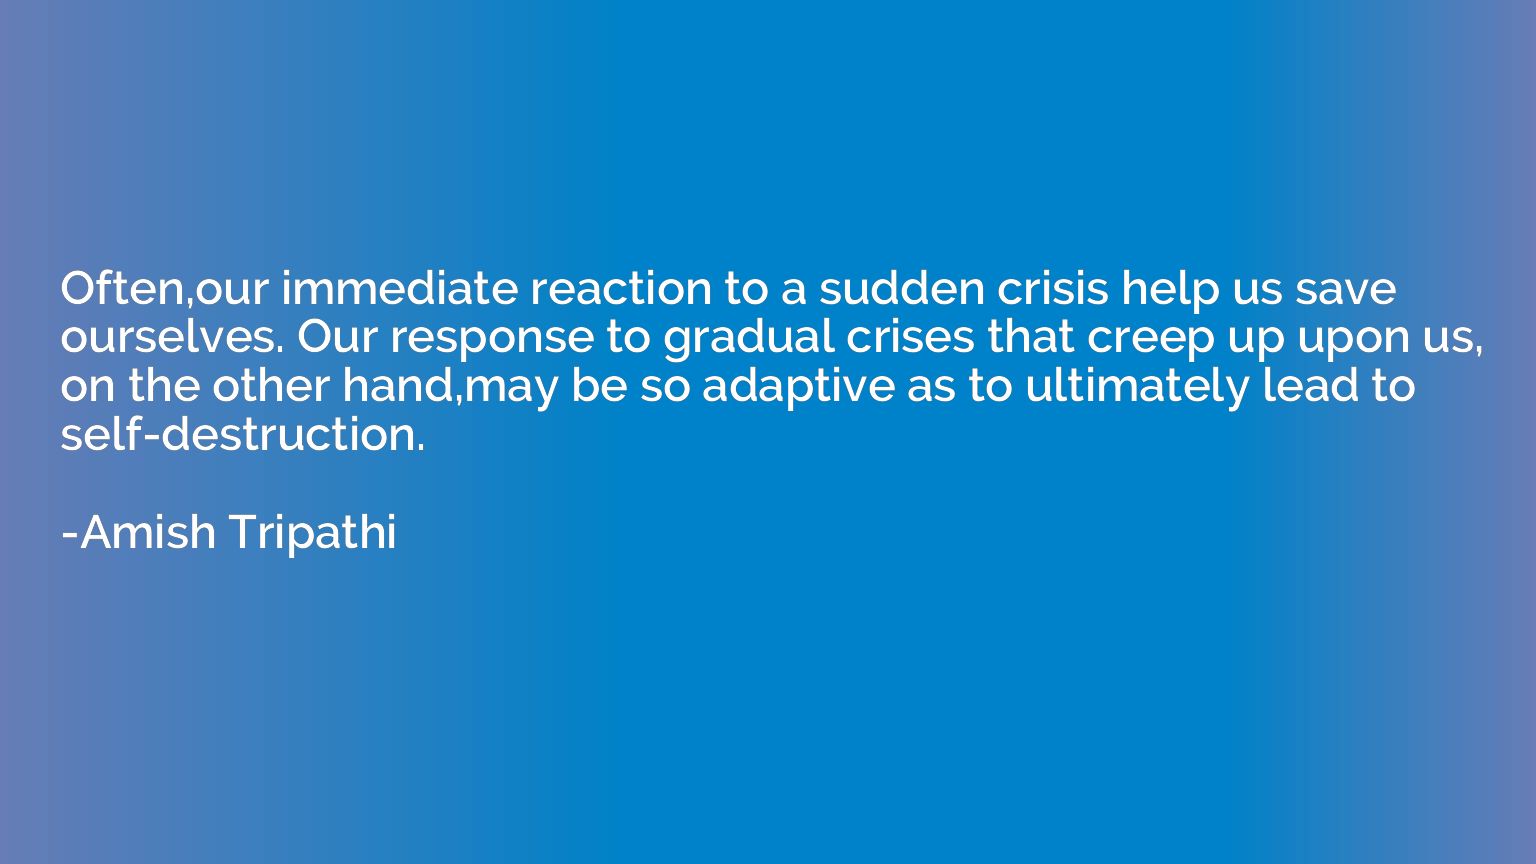 Often,our immediate reaction to a sudden crisis help us save